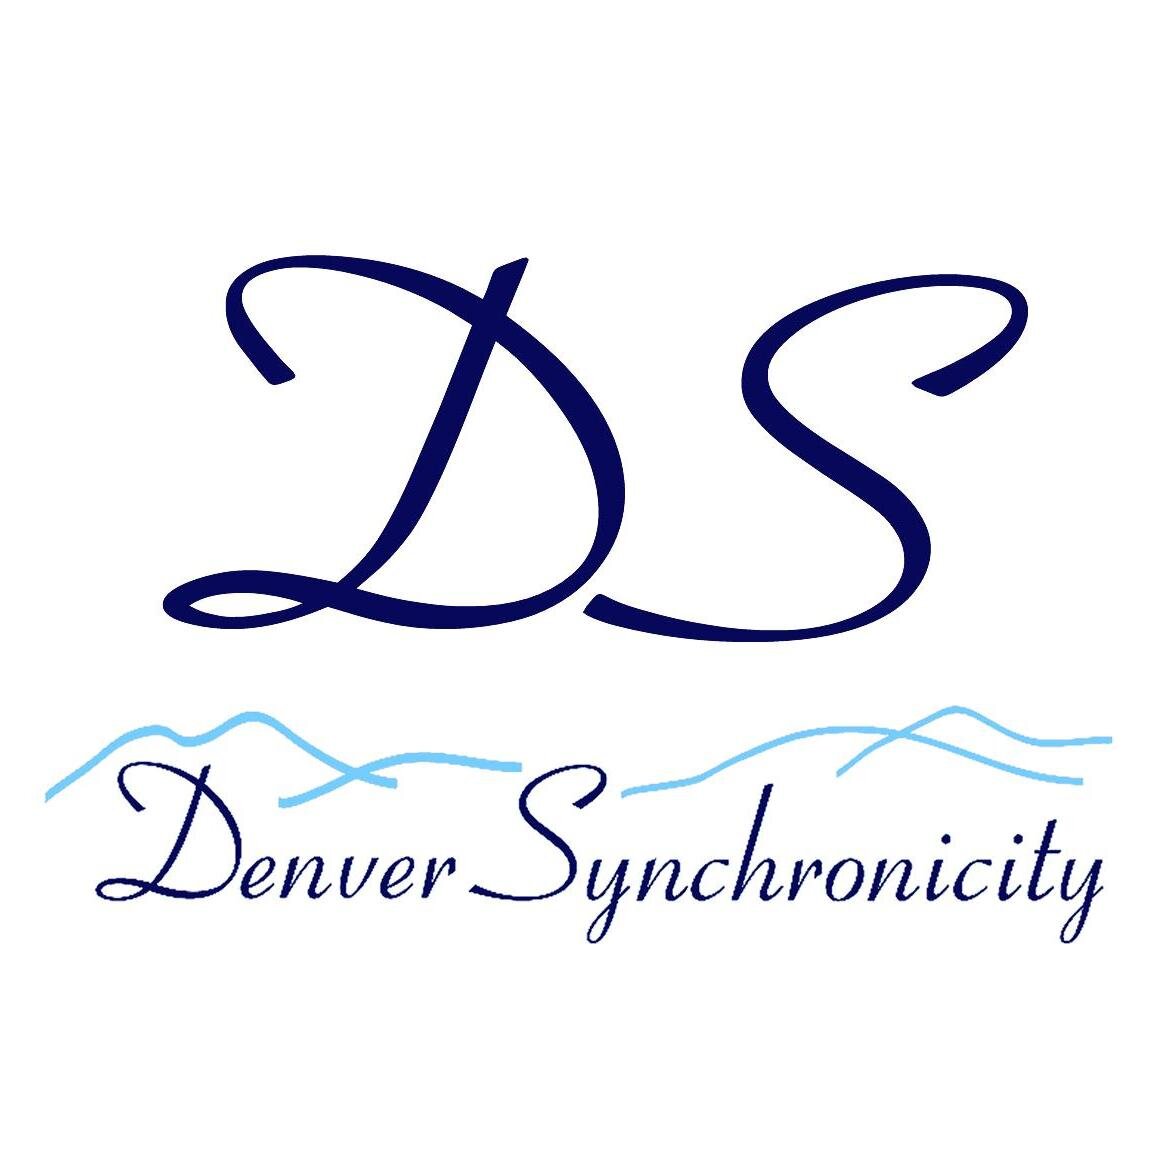 Denver Synchronicity fields developmental and nationally competitive synchronized skating teams from Beginner through Masters